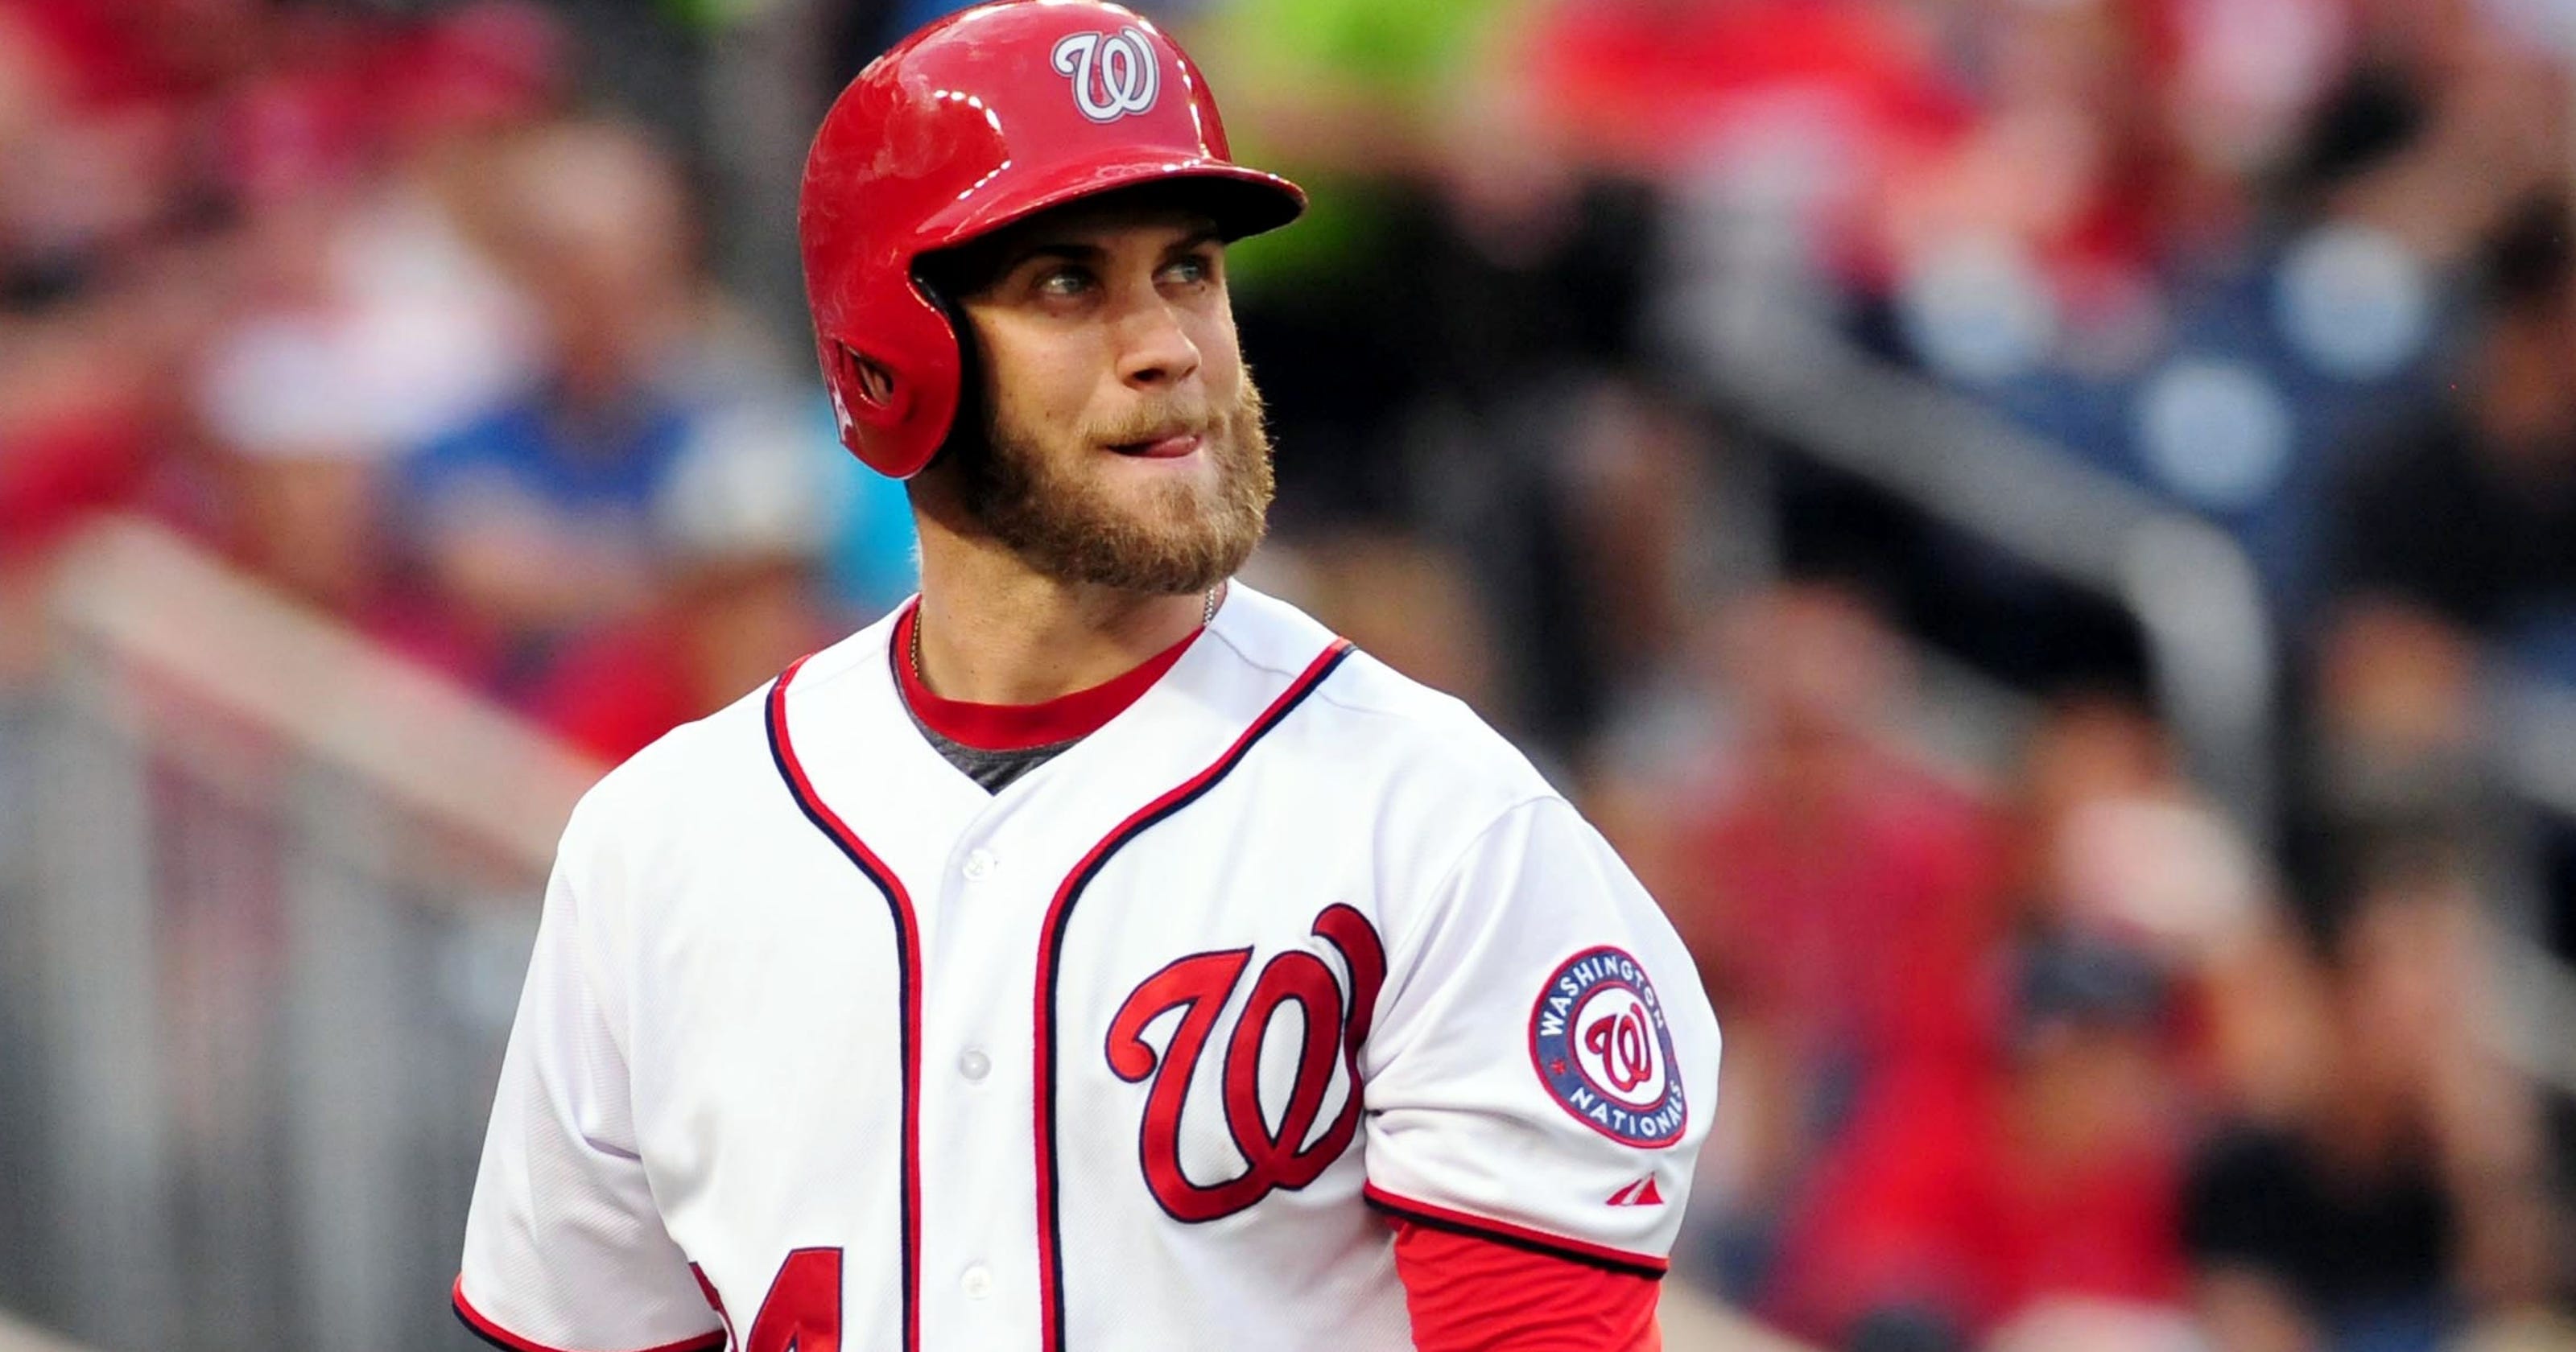 Text message helps Bryce Harper get back in Nationals lineup